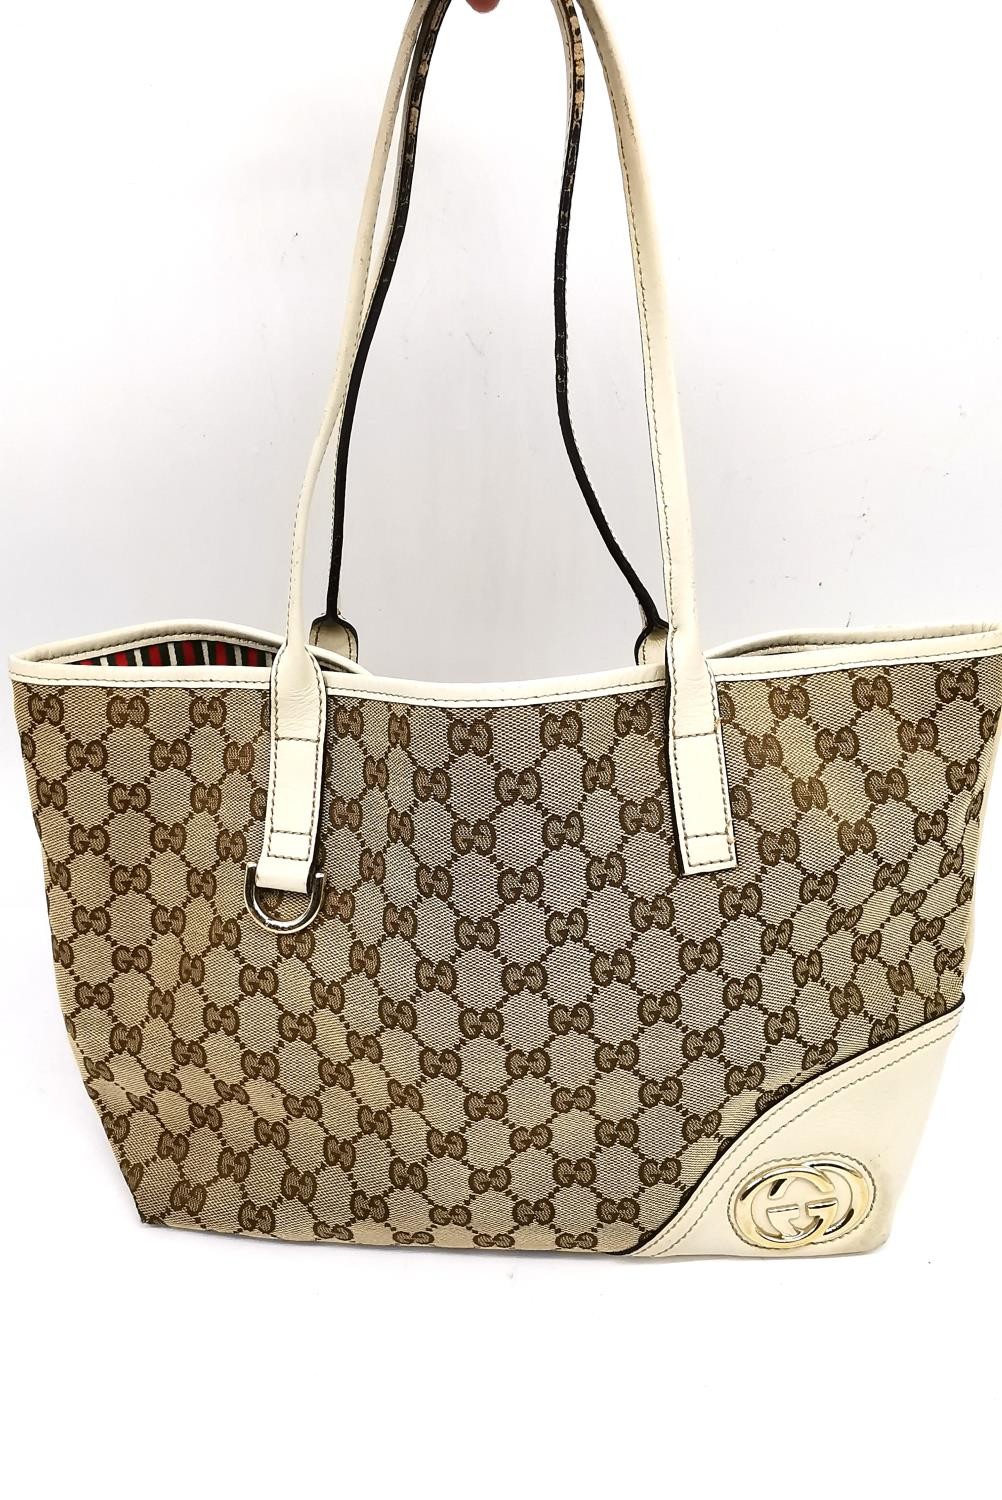 A Gucci GG canvas brtitt large tote bag beige and ebony, red, green and white striped interior. Base - Image 2 of 8